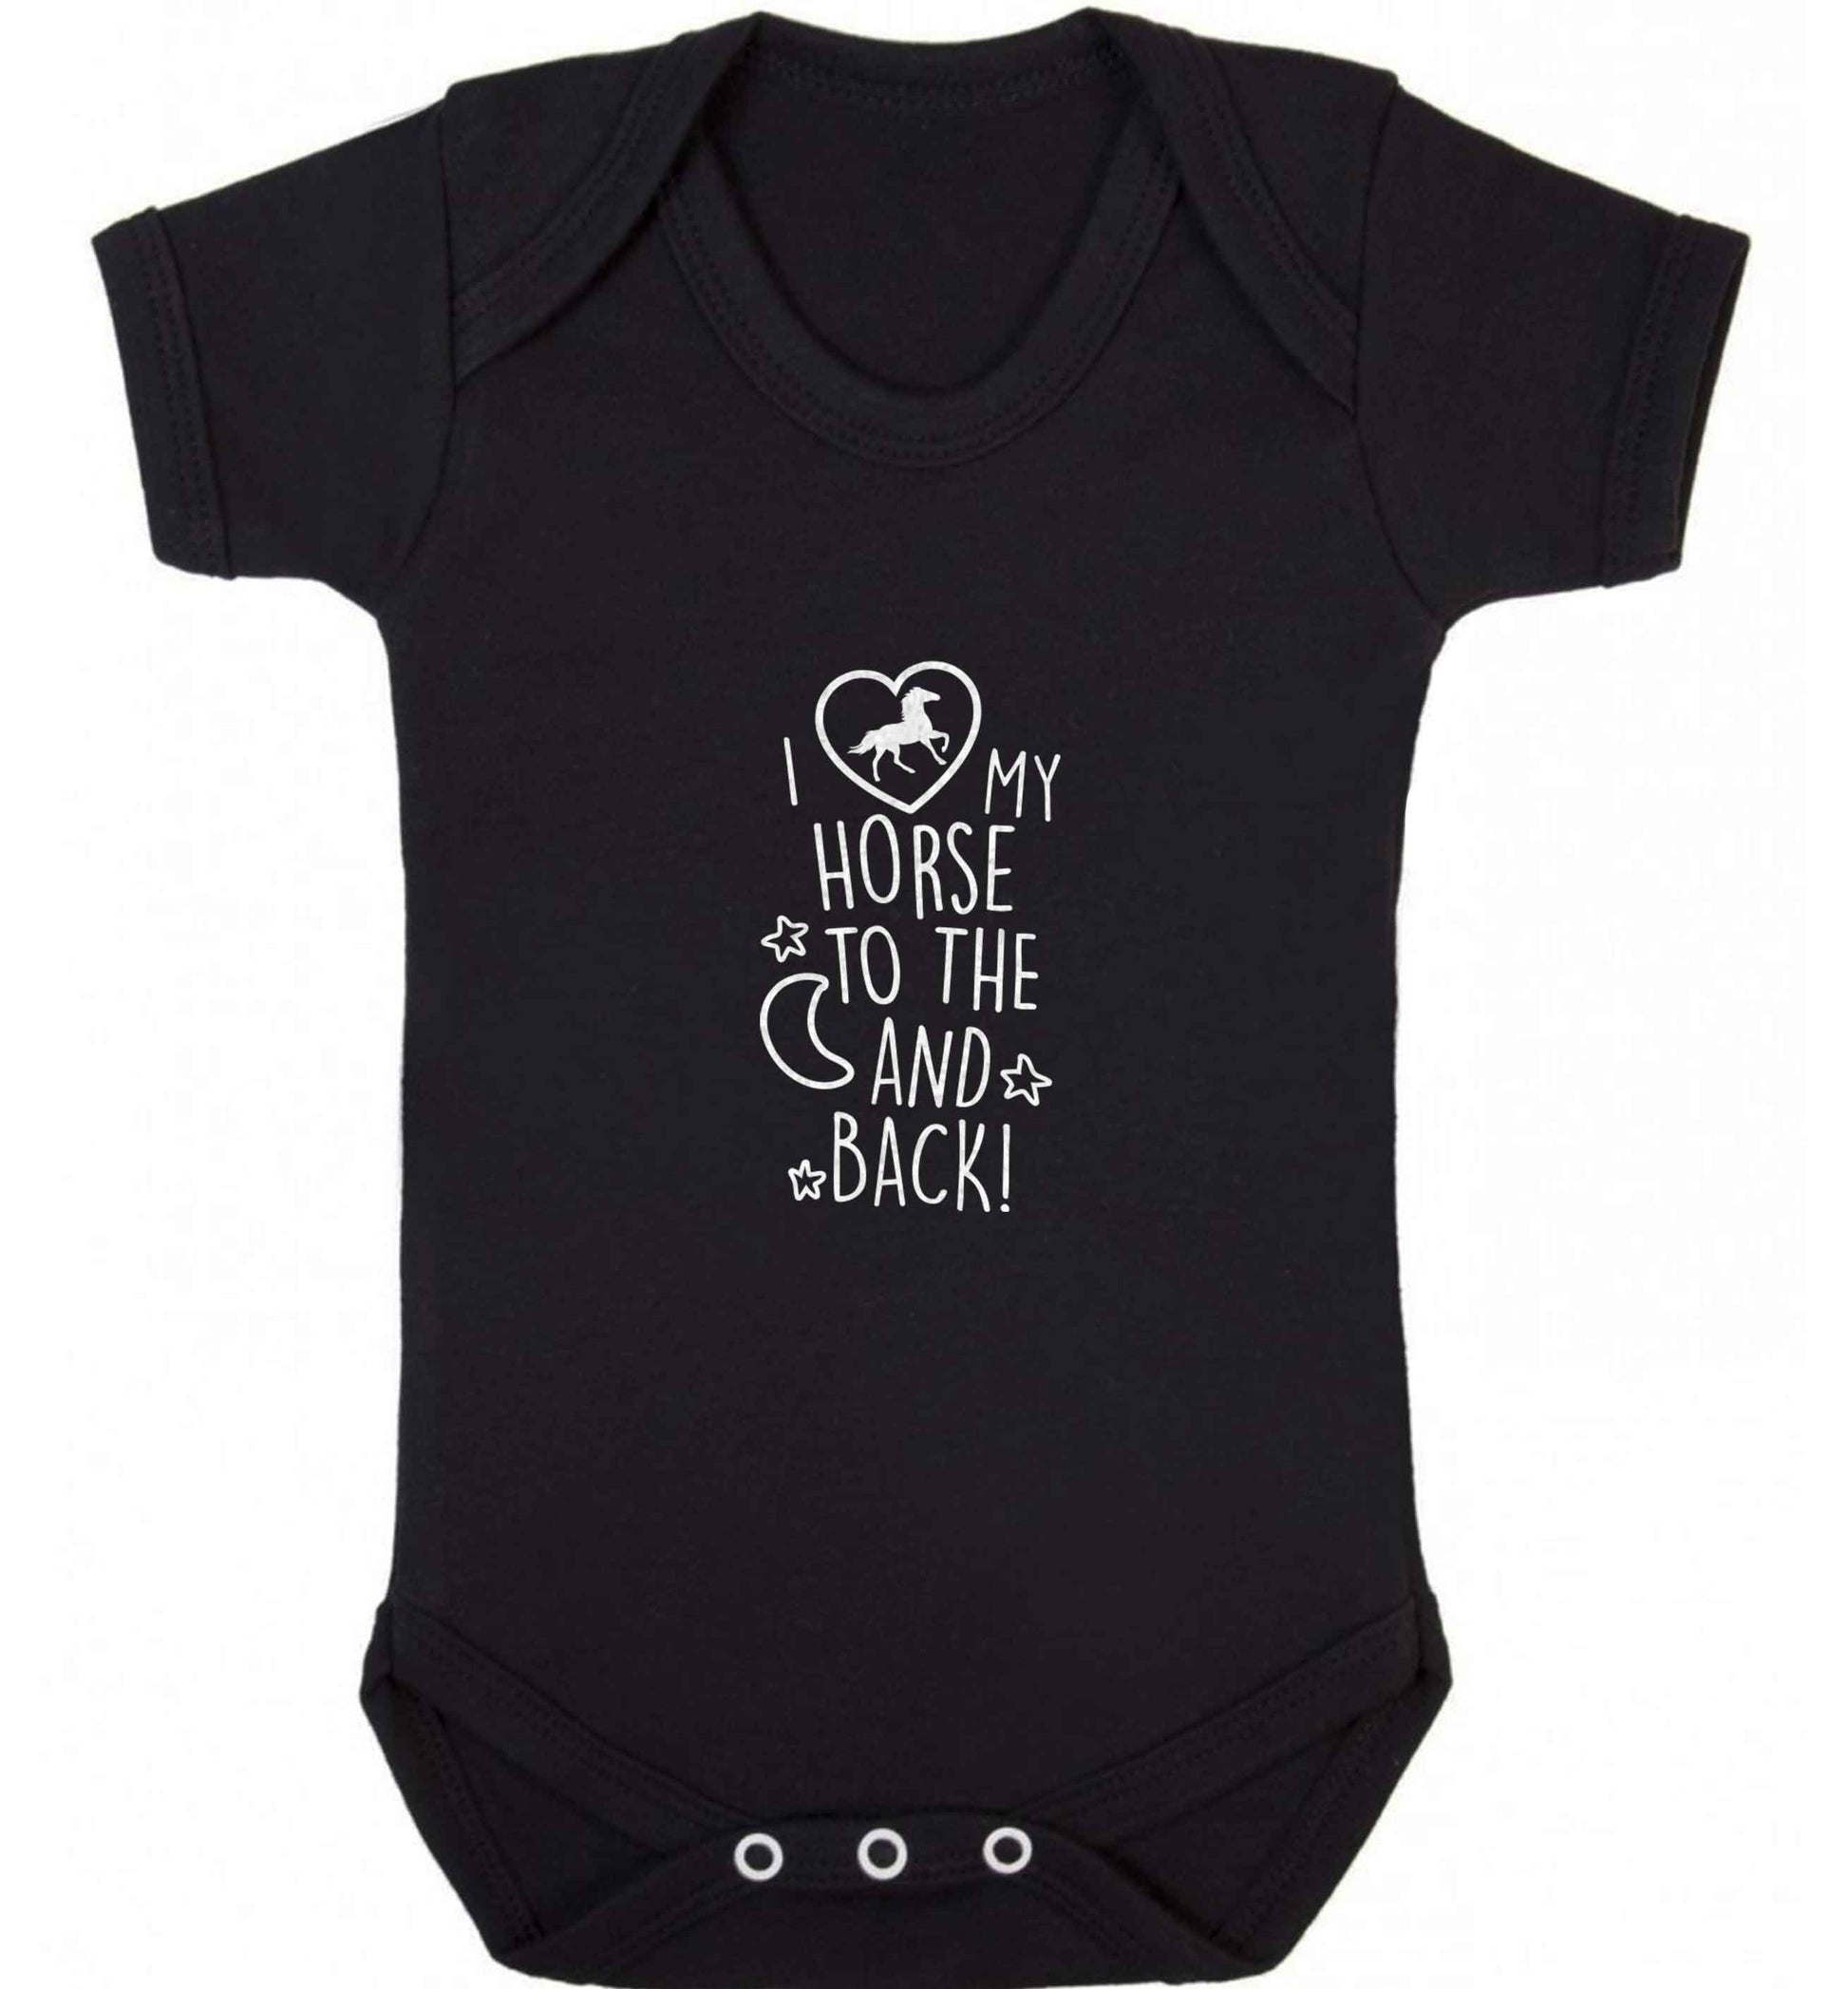 I love my horse to the moon and back baby vest black 18-24 months